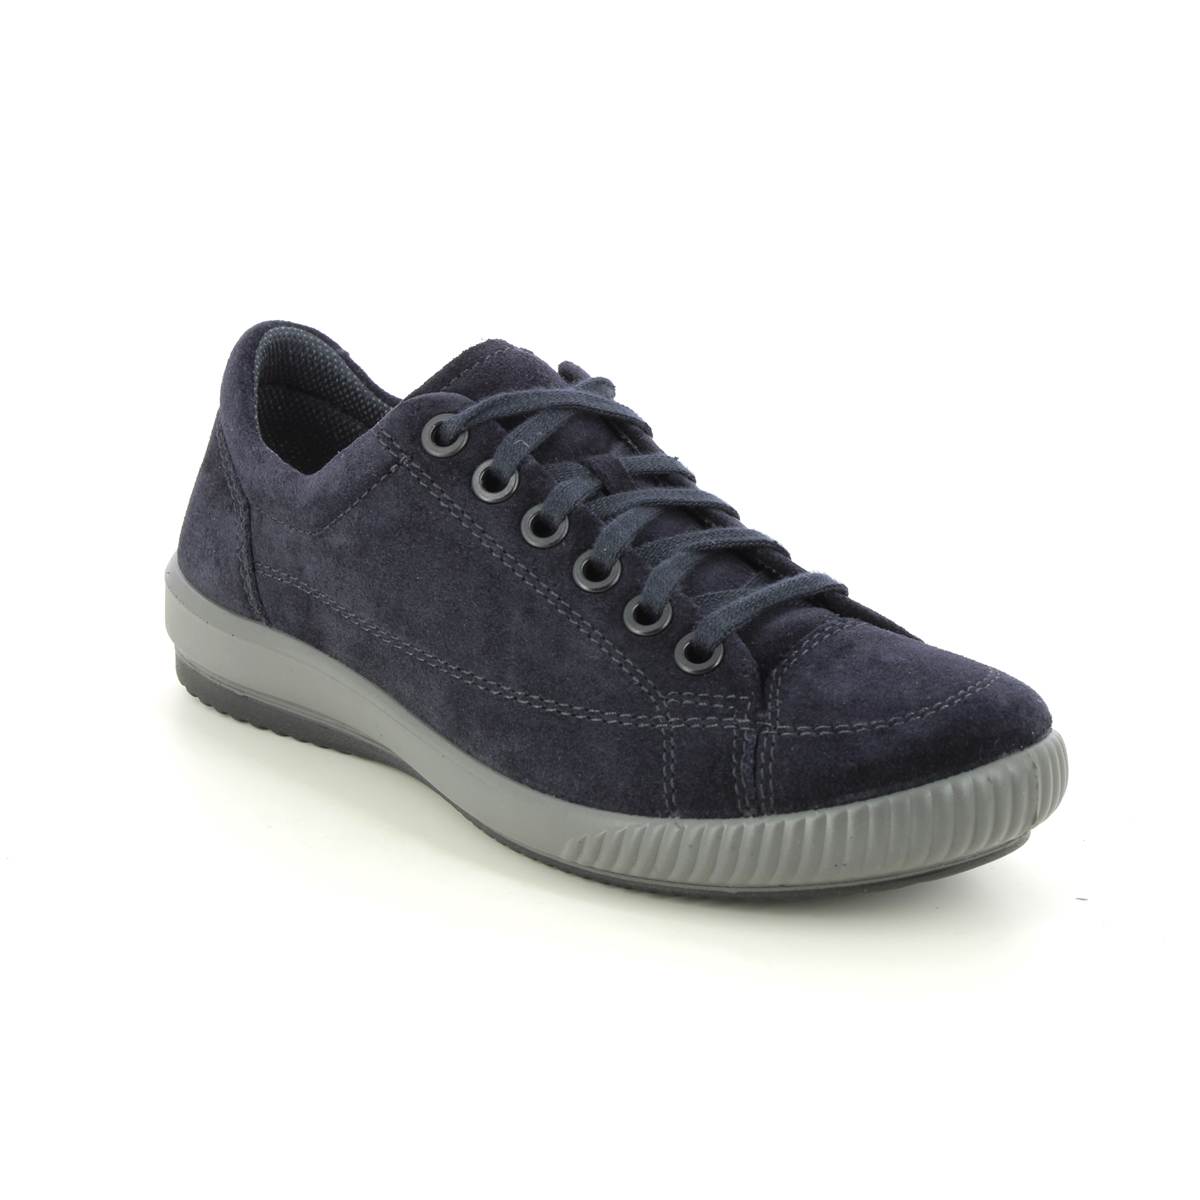 Legero Tanaro 5 Stitch Navy Suede Womens lacing shoes 2000161-8000 in a Plain Leather in Size 6